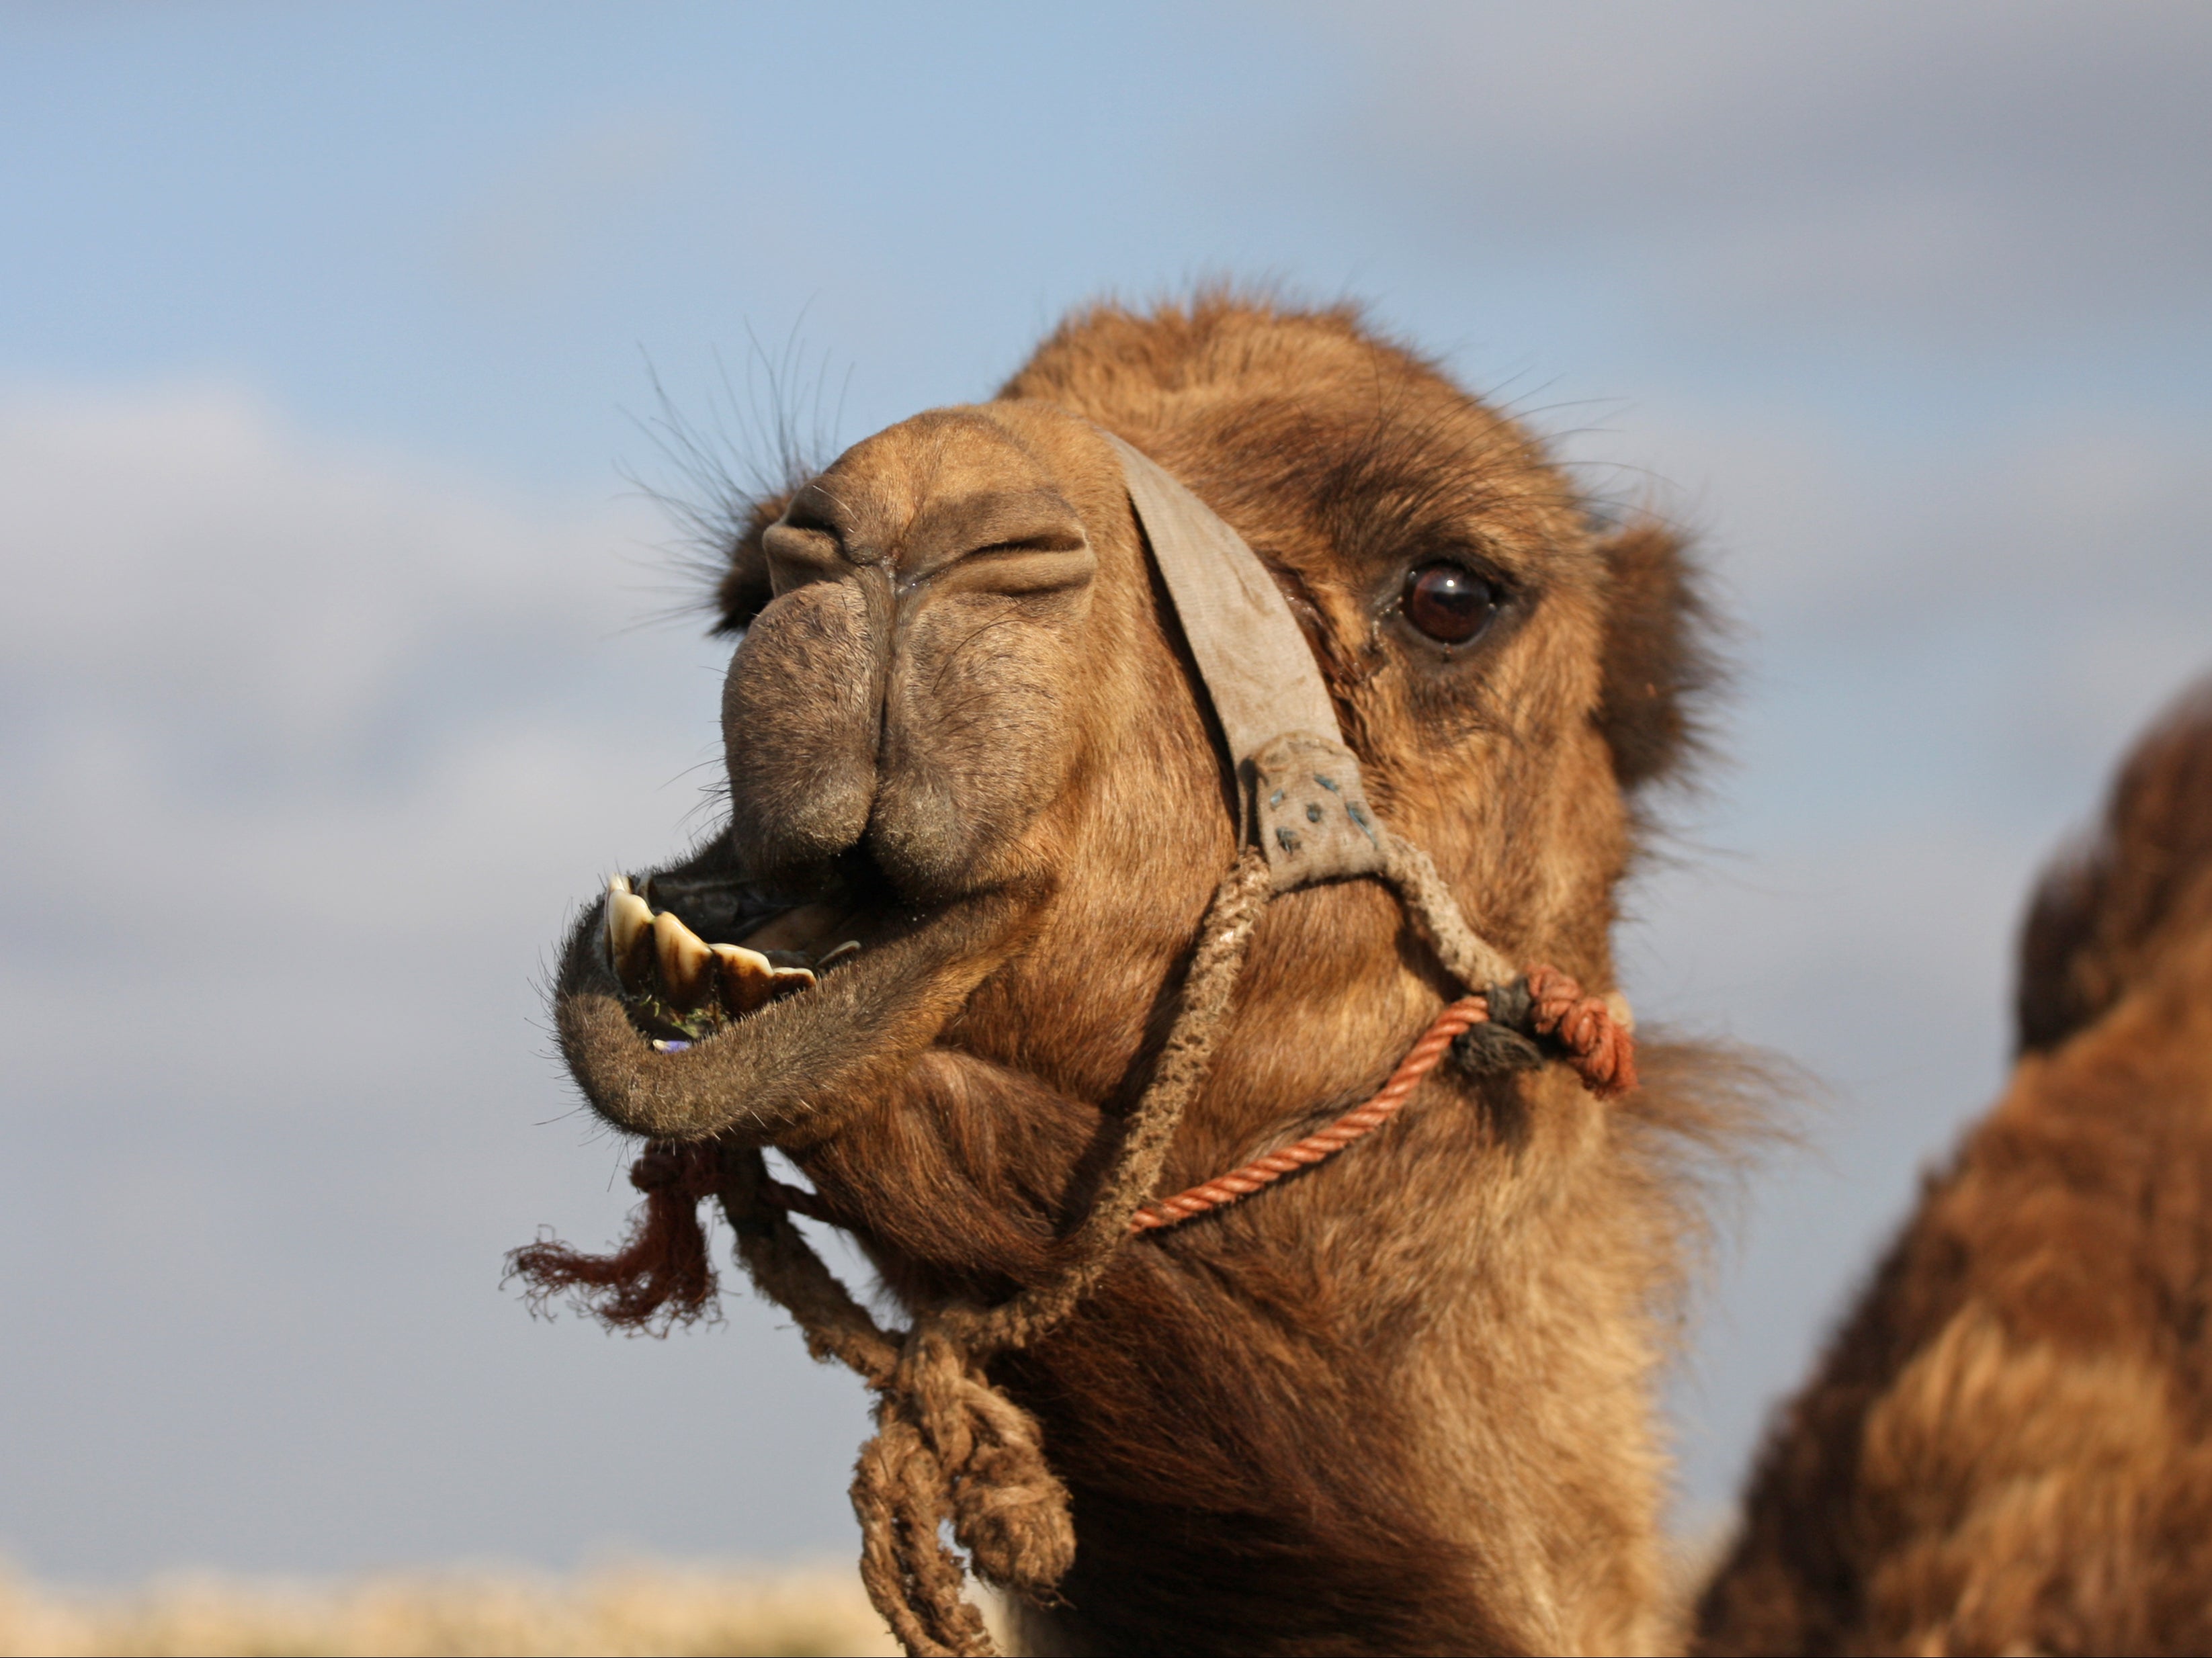 A camel caused ‘minor injuries’ to staff members during encounter